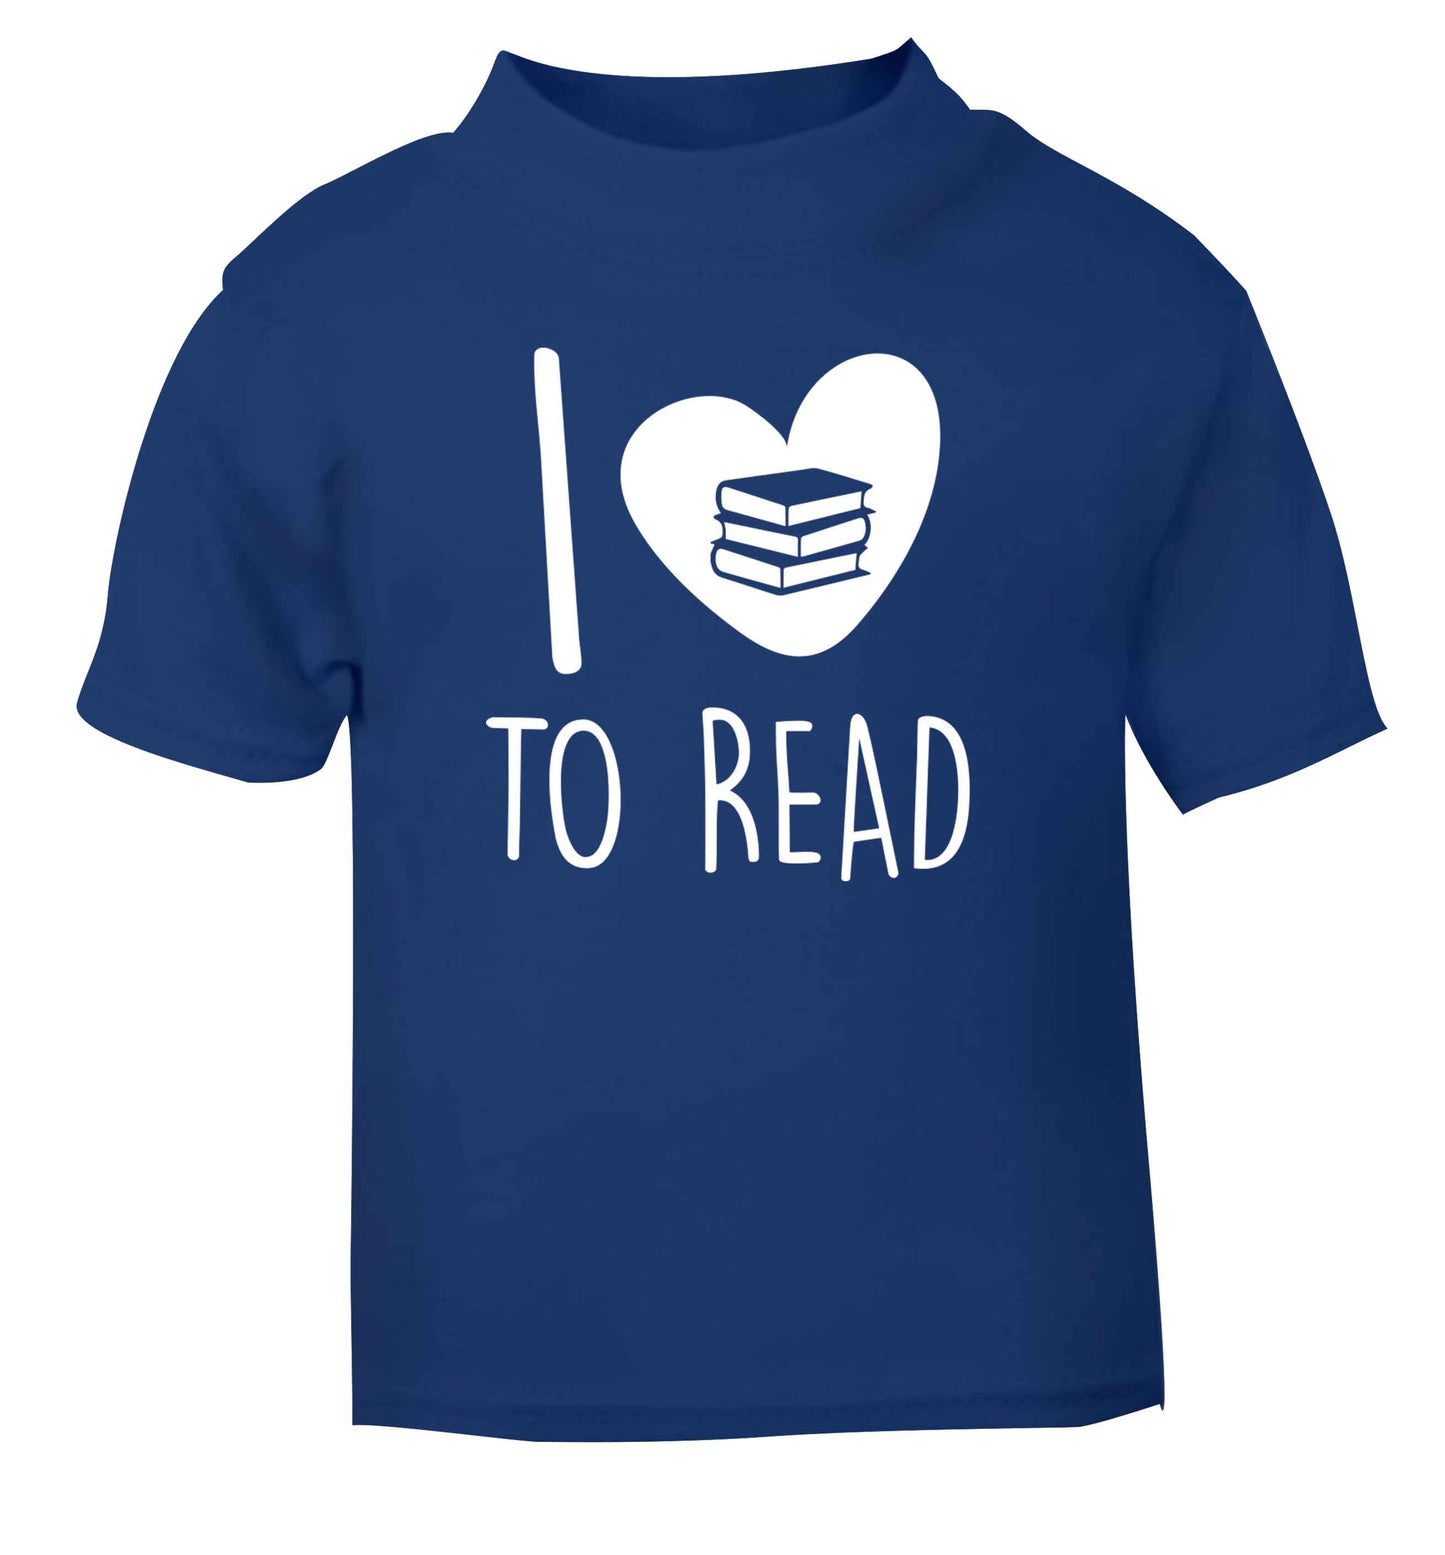 I love to read blue Baby Toddler Tshirt 2 Years